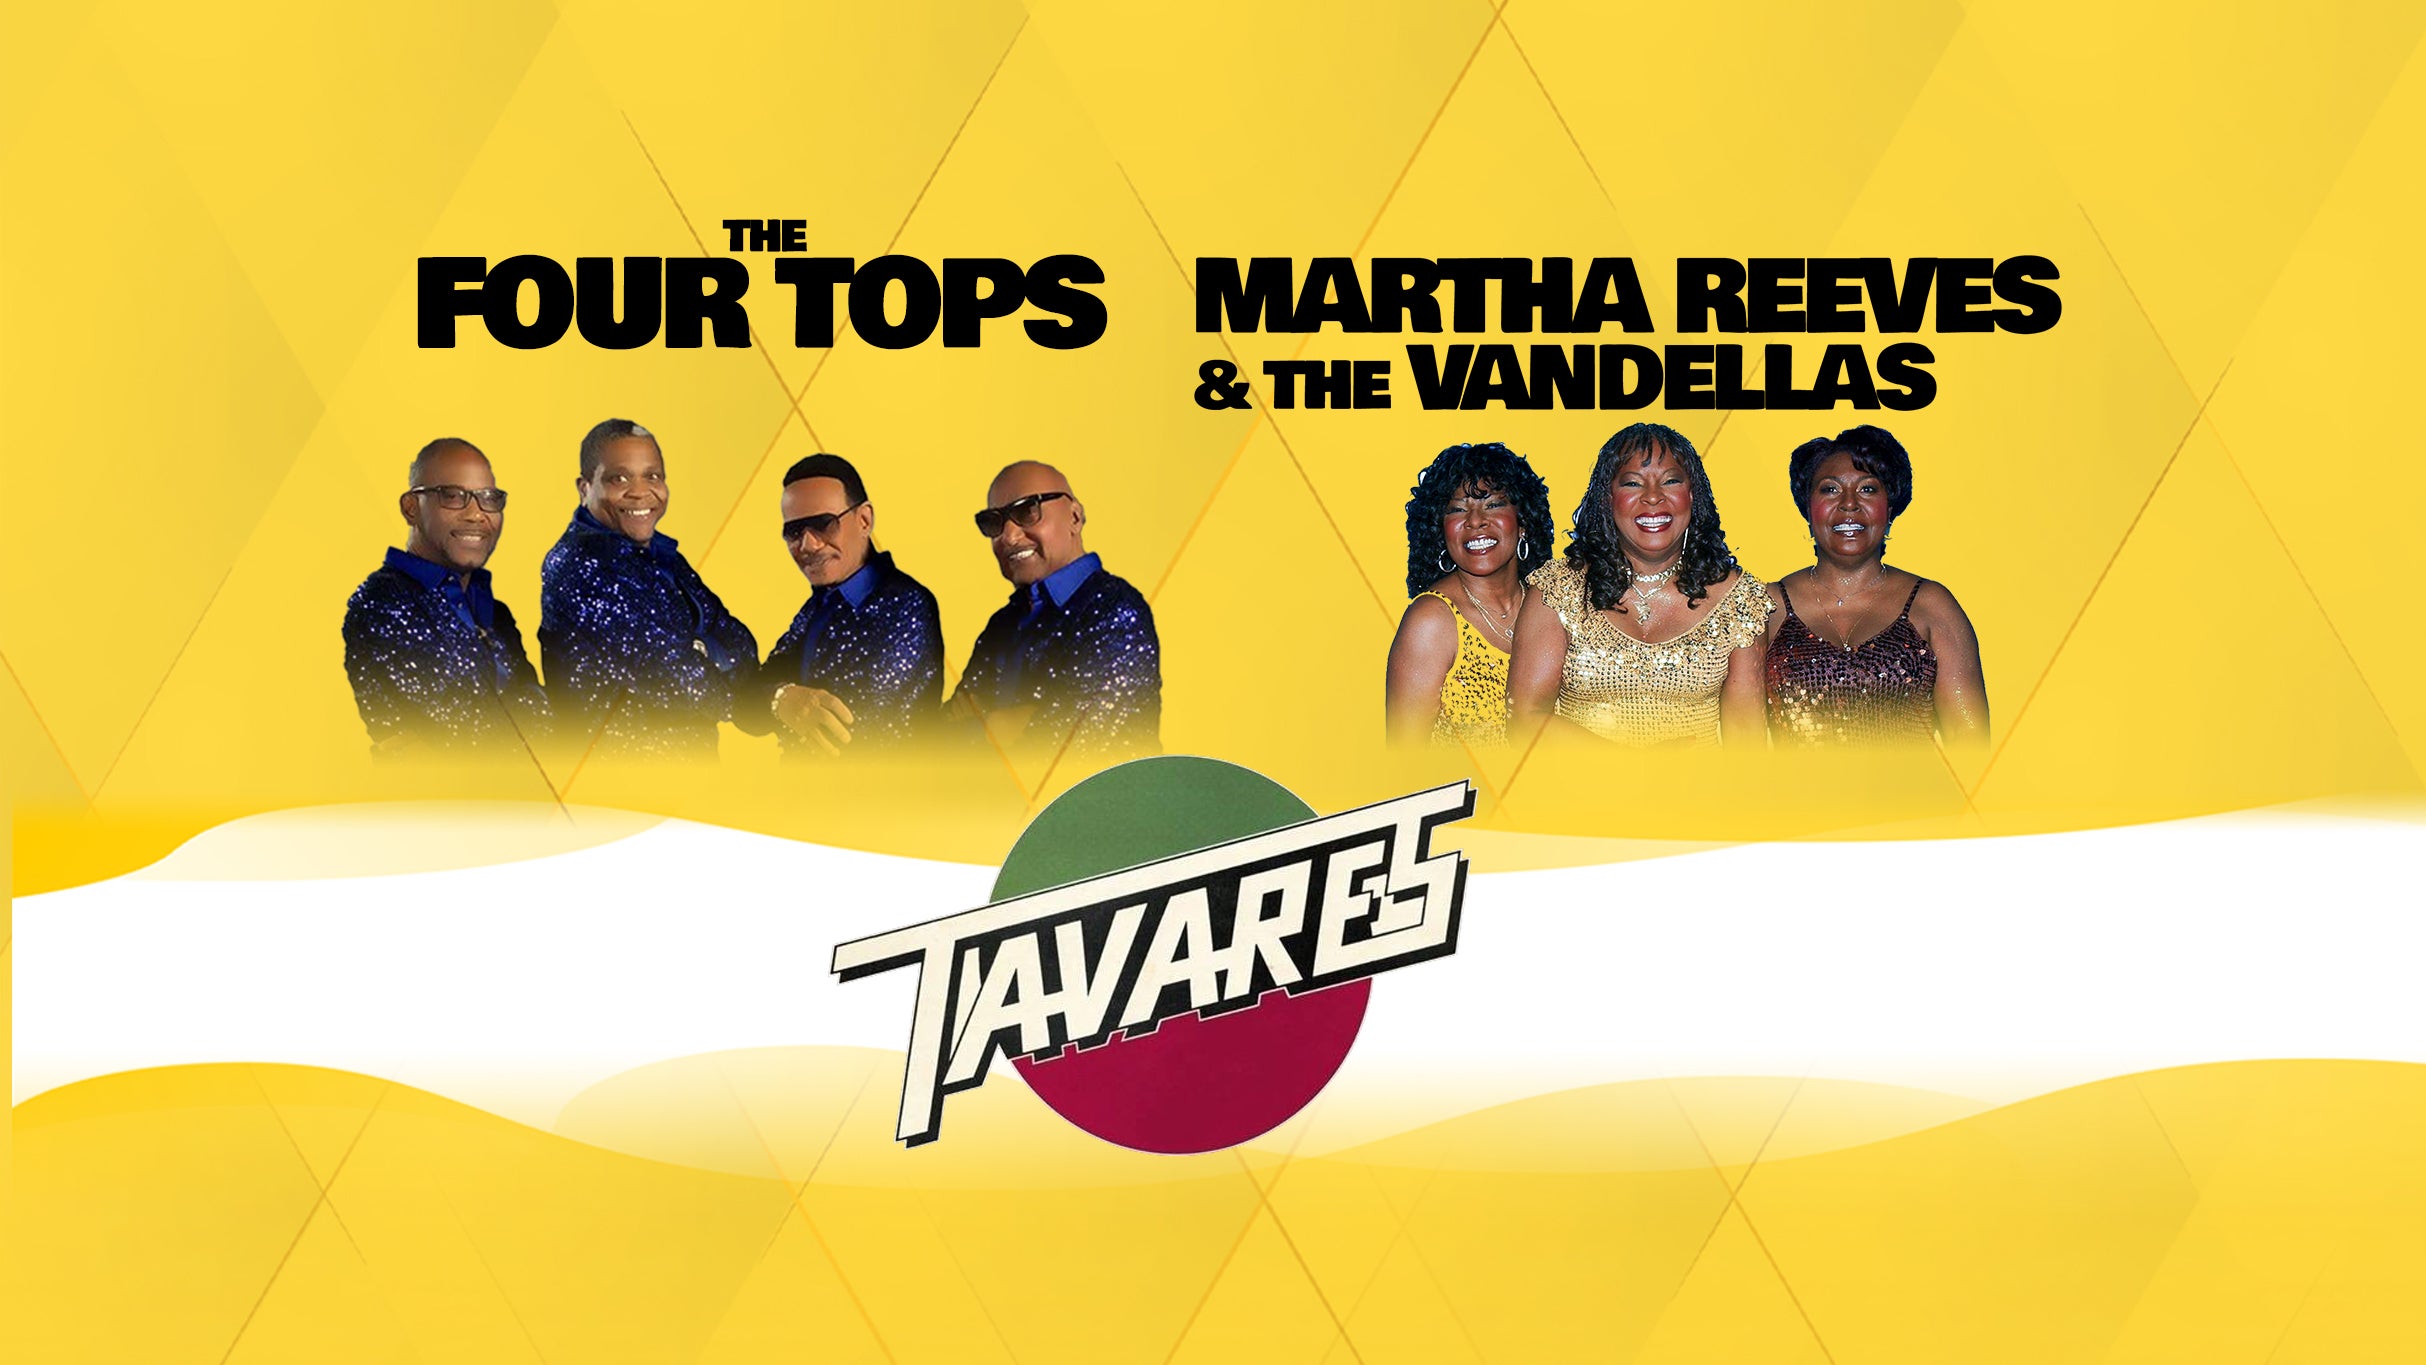 accurate presale code for The Four Tops/ Tavares /Martha Reeves & the Vandellas face value tickets in Hull